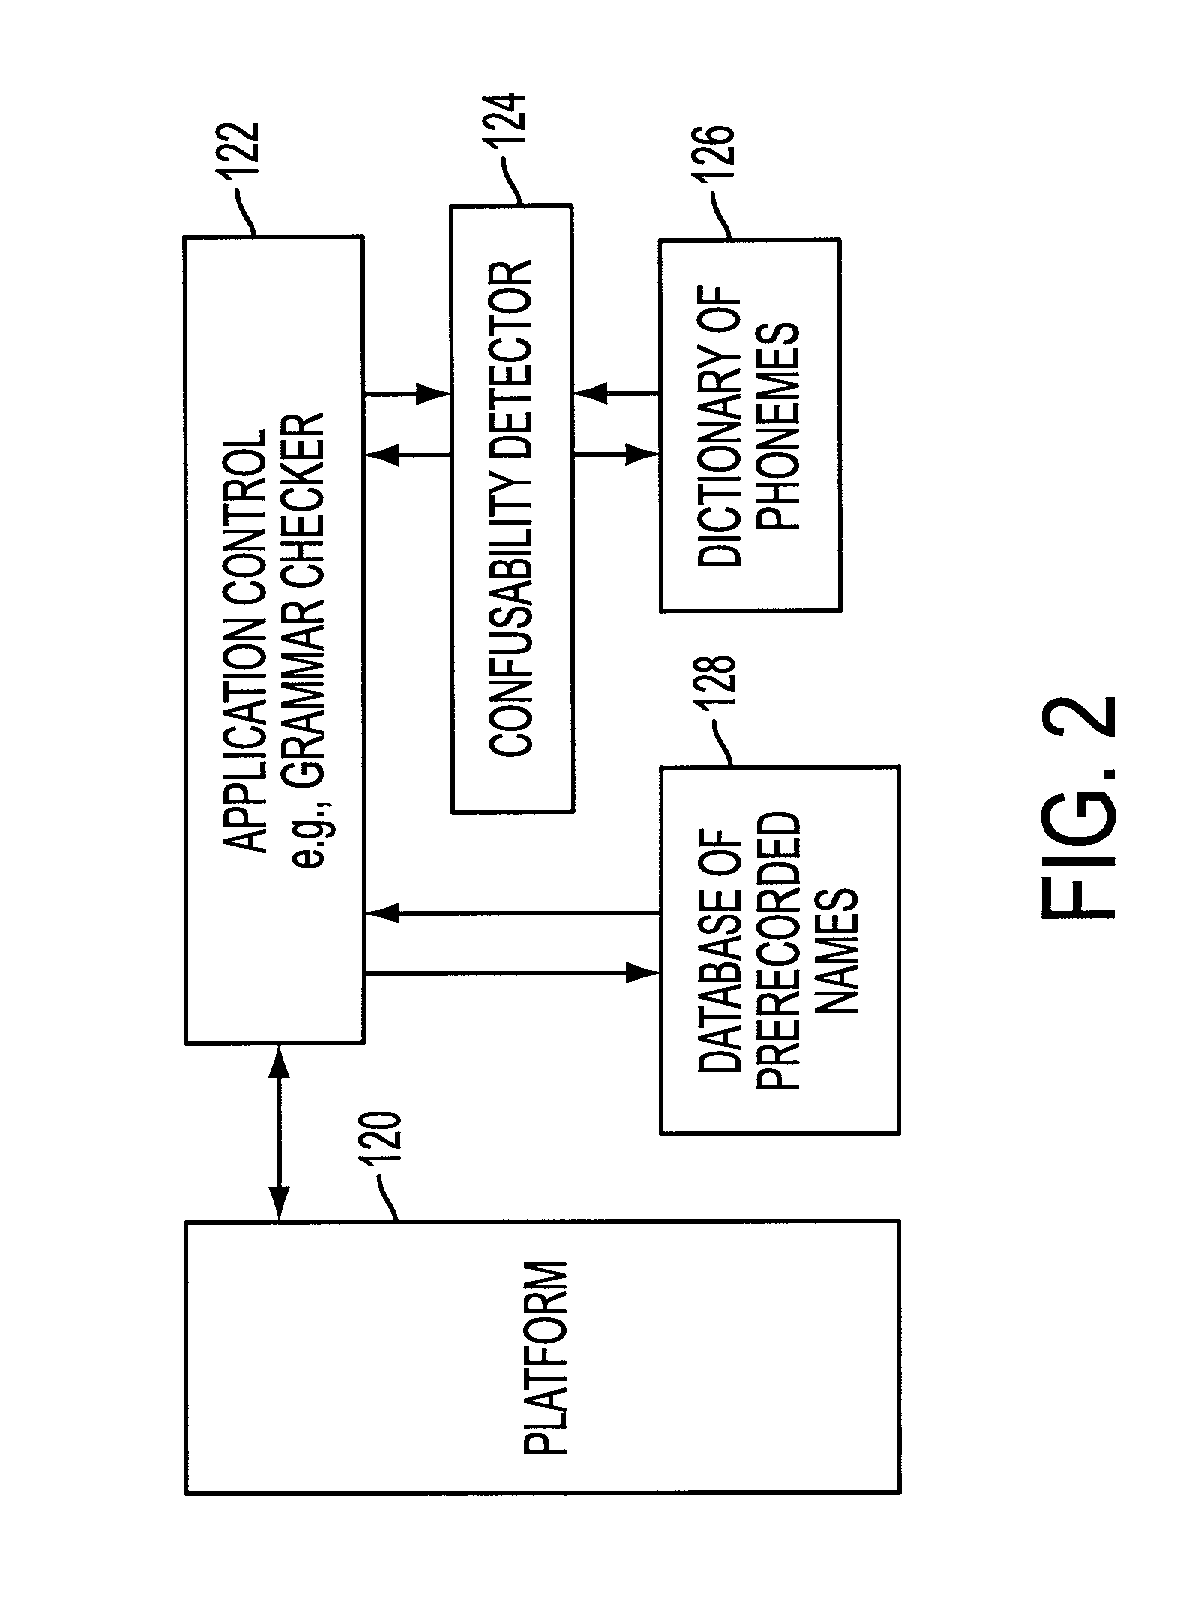 Method of assessing degree of acoustic confusability, and system therefor